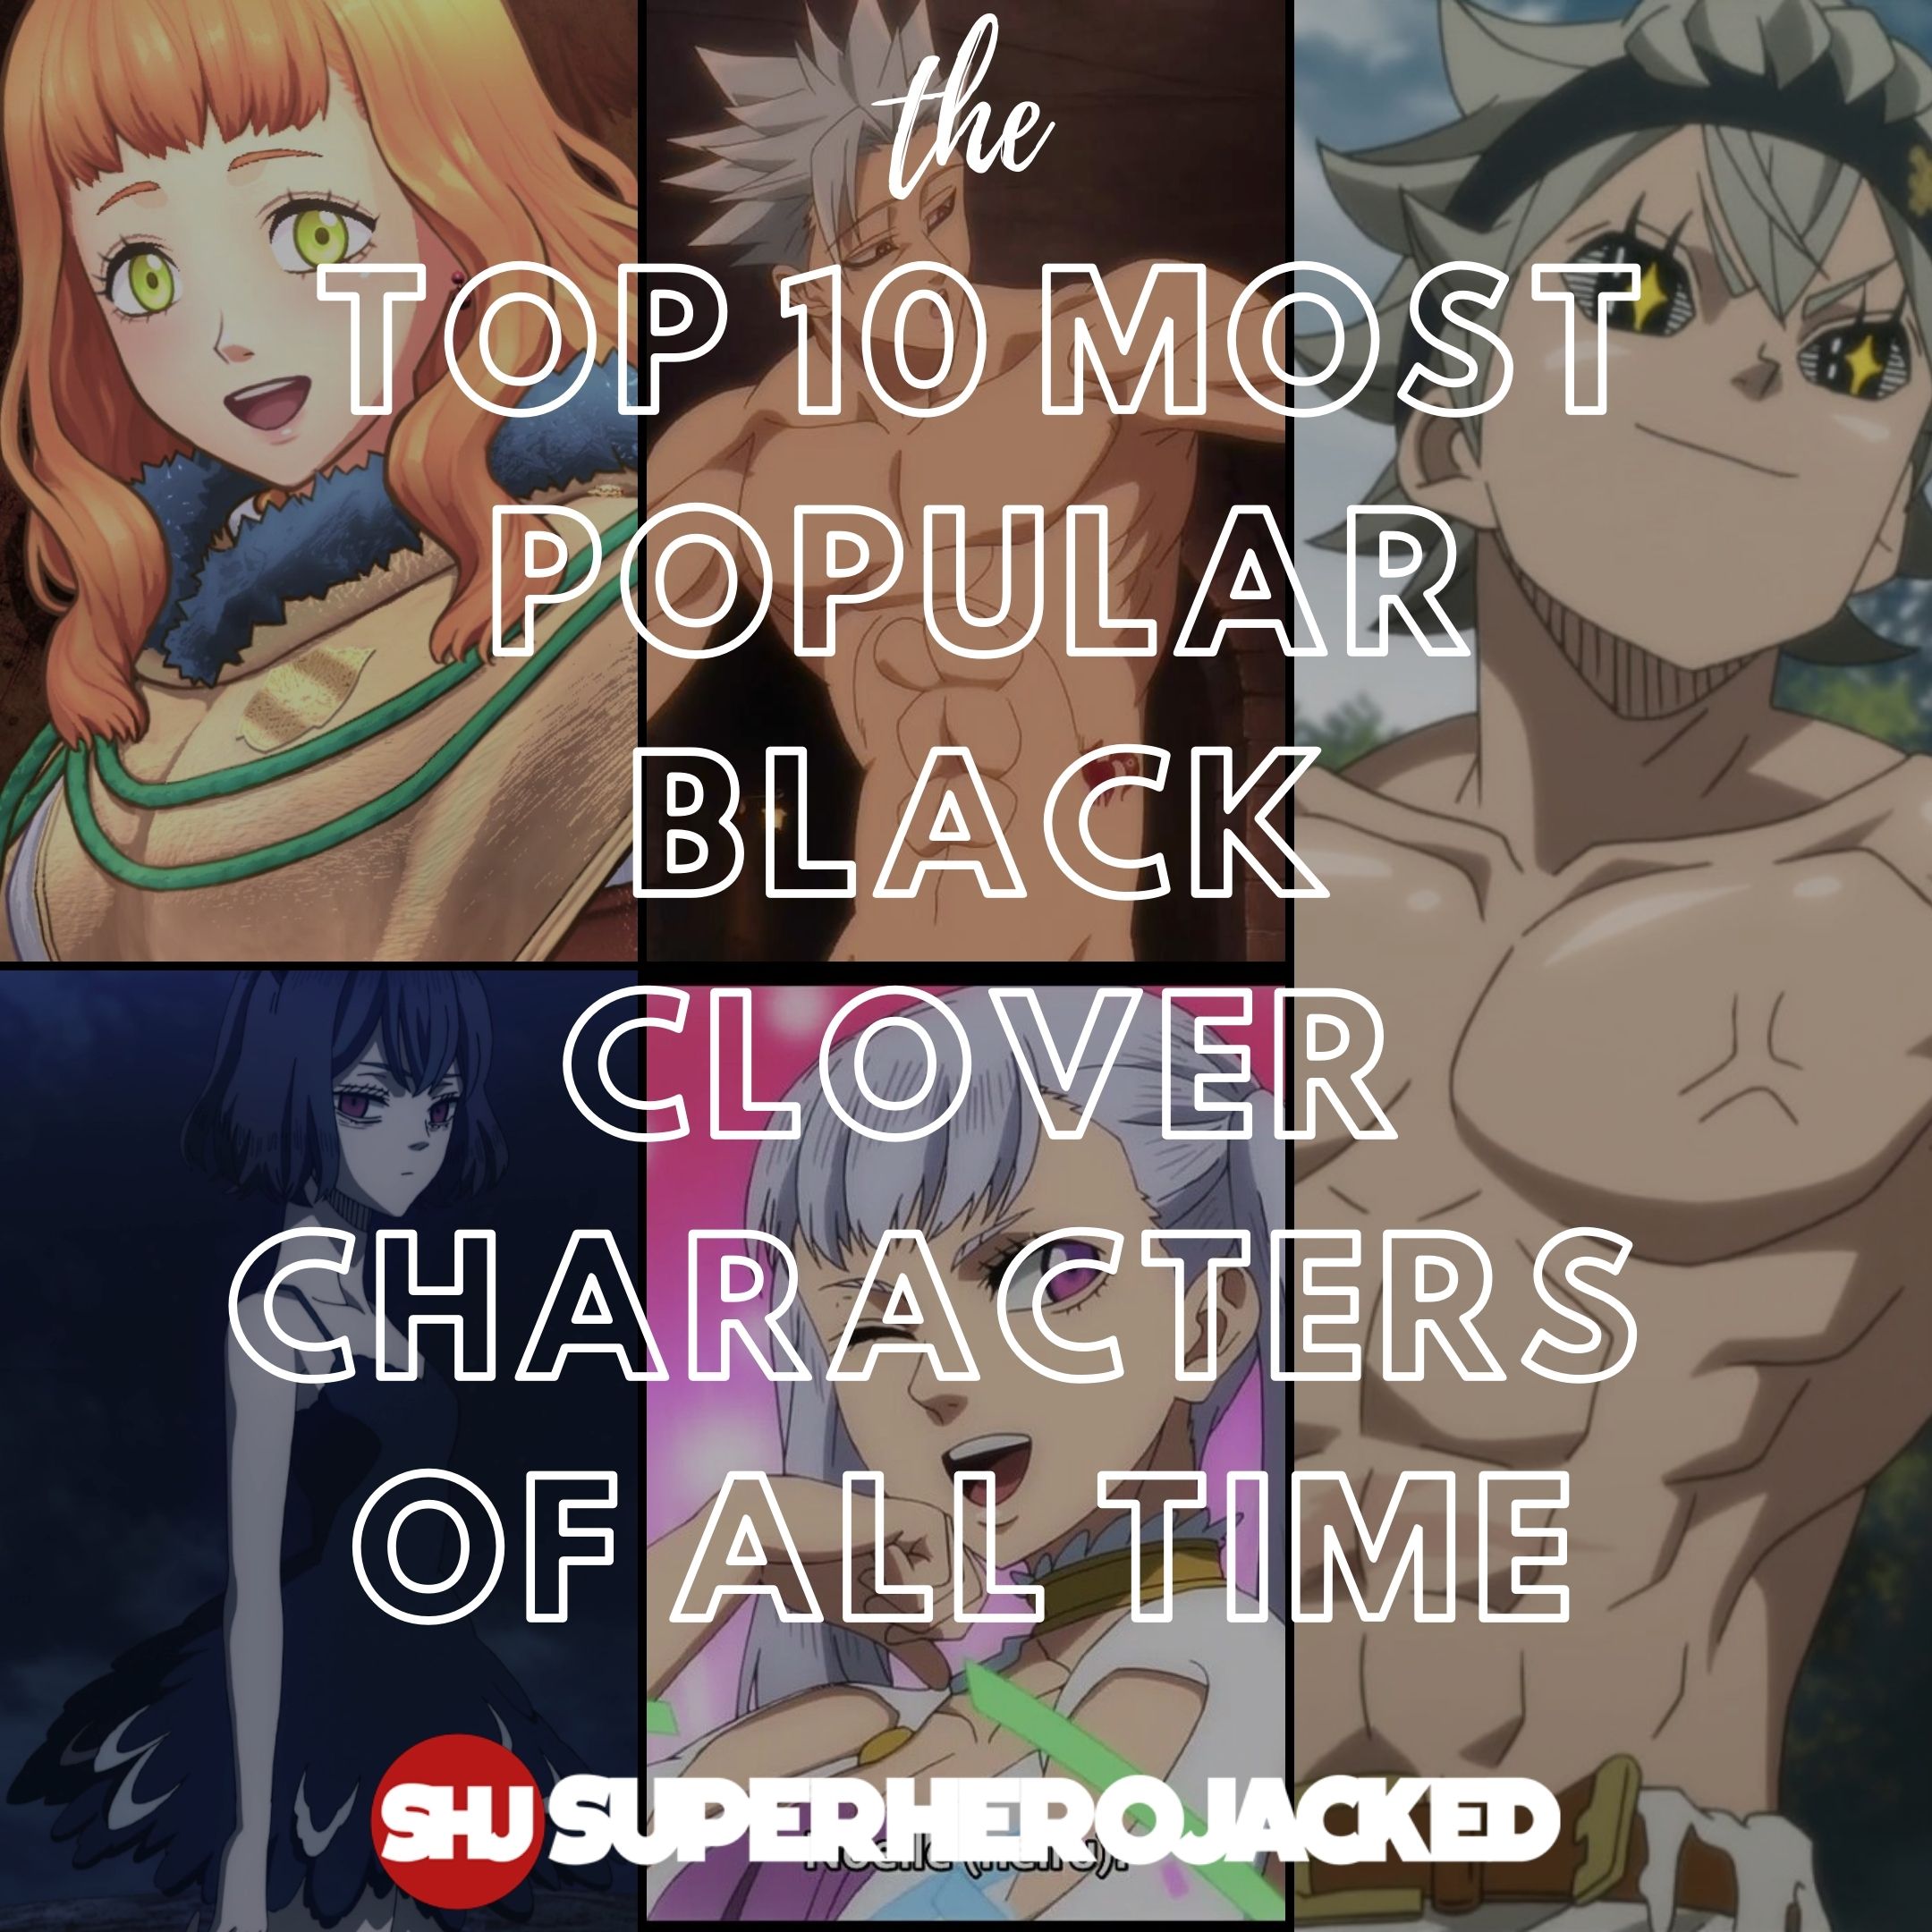 Top 10 Most Popular Black Clover Characters of All Time